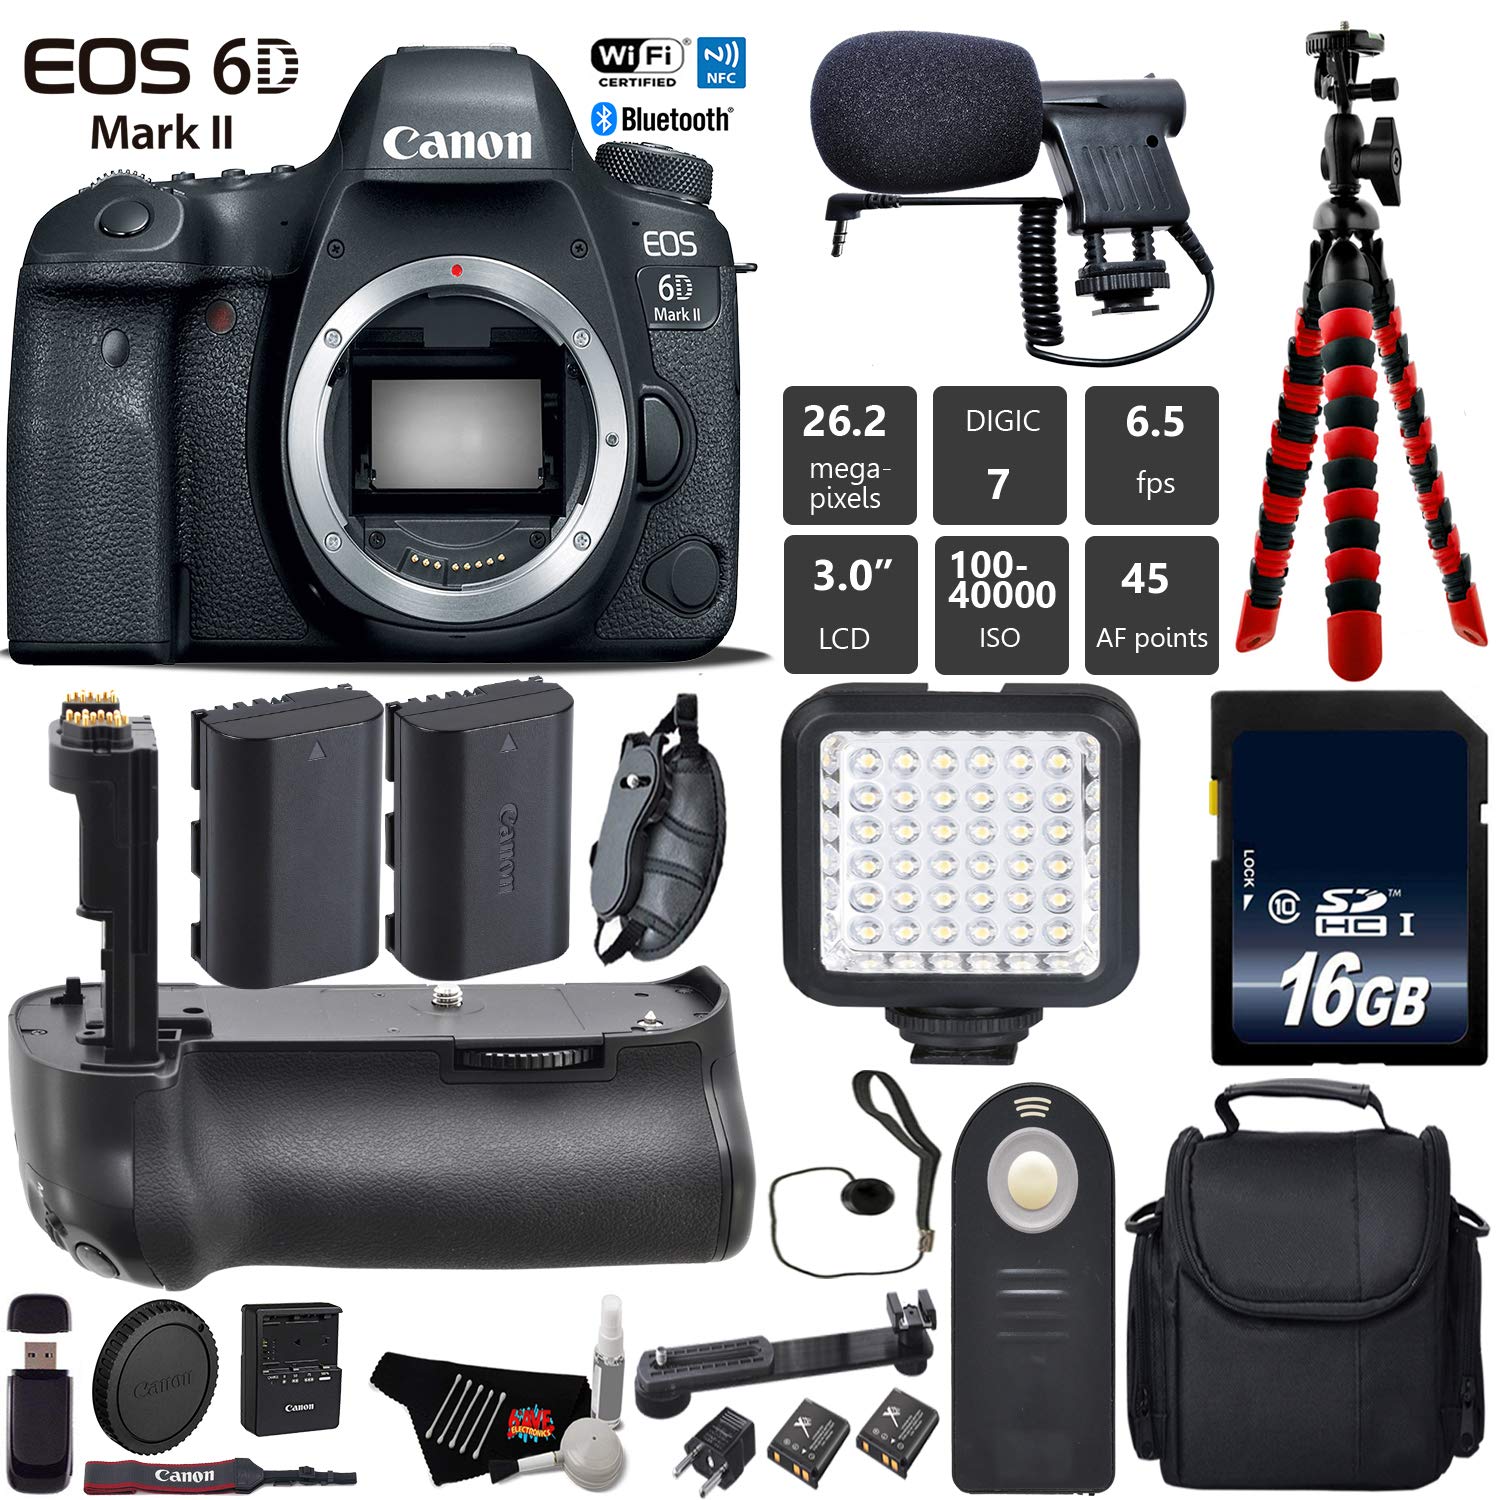 Canon EOS 6D Mark II DSLR Camera (Body Only) + Professional Battery Grip + Condenser Microphone + LED Kit + Extra Battery Base Bundle